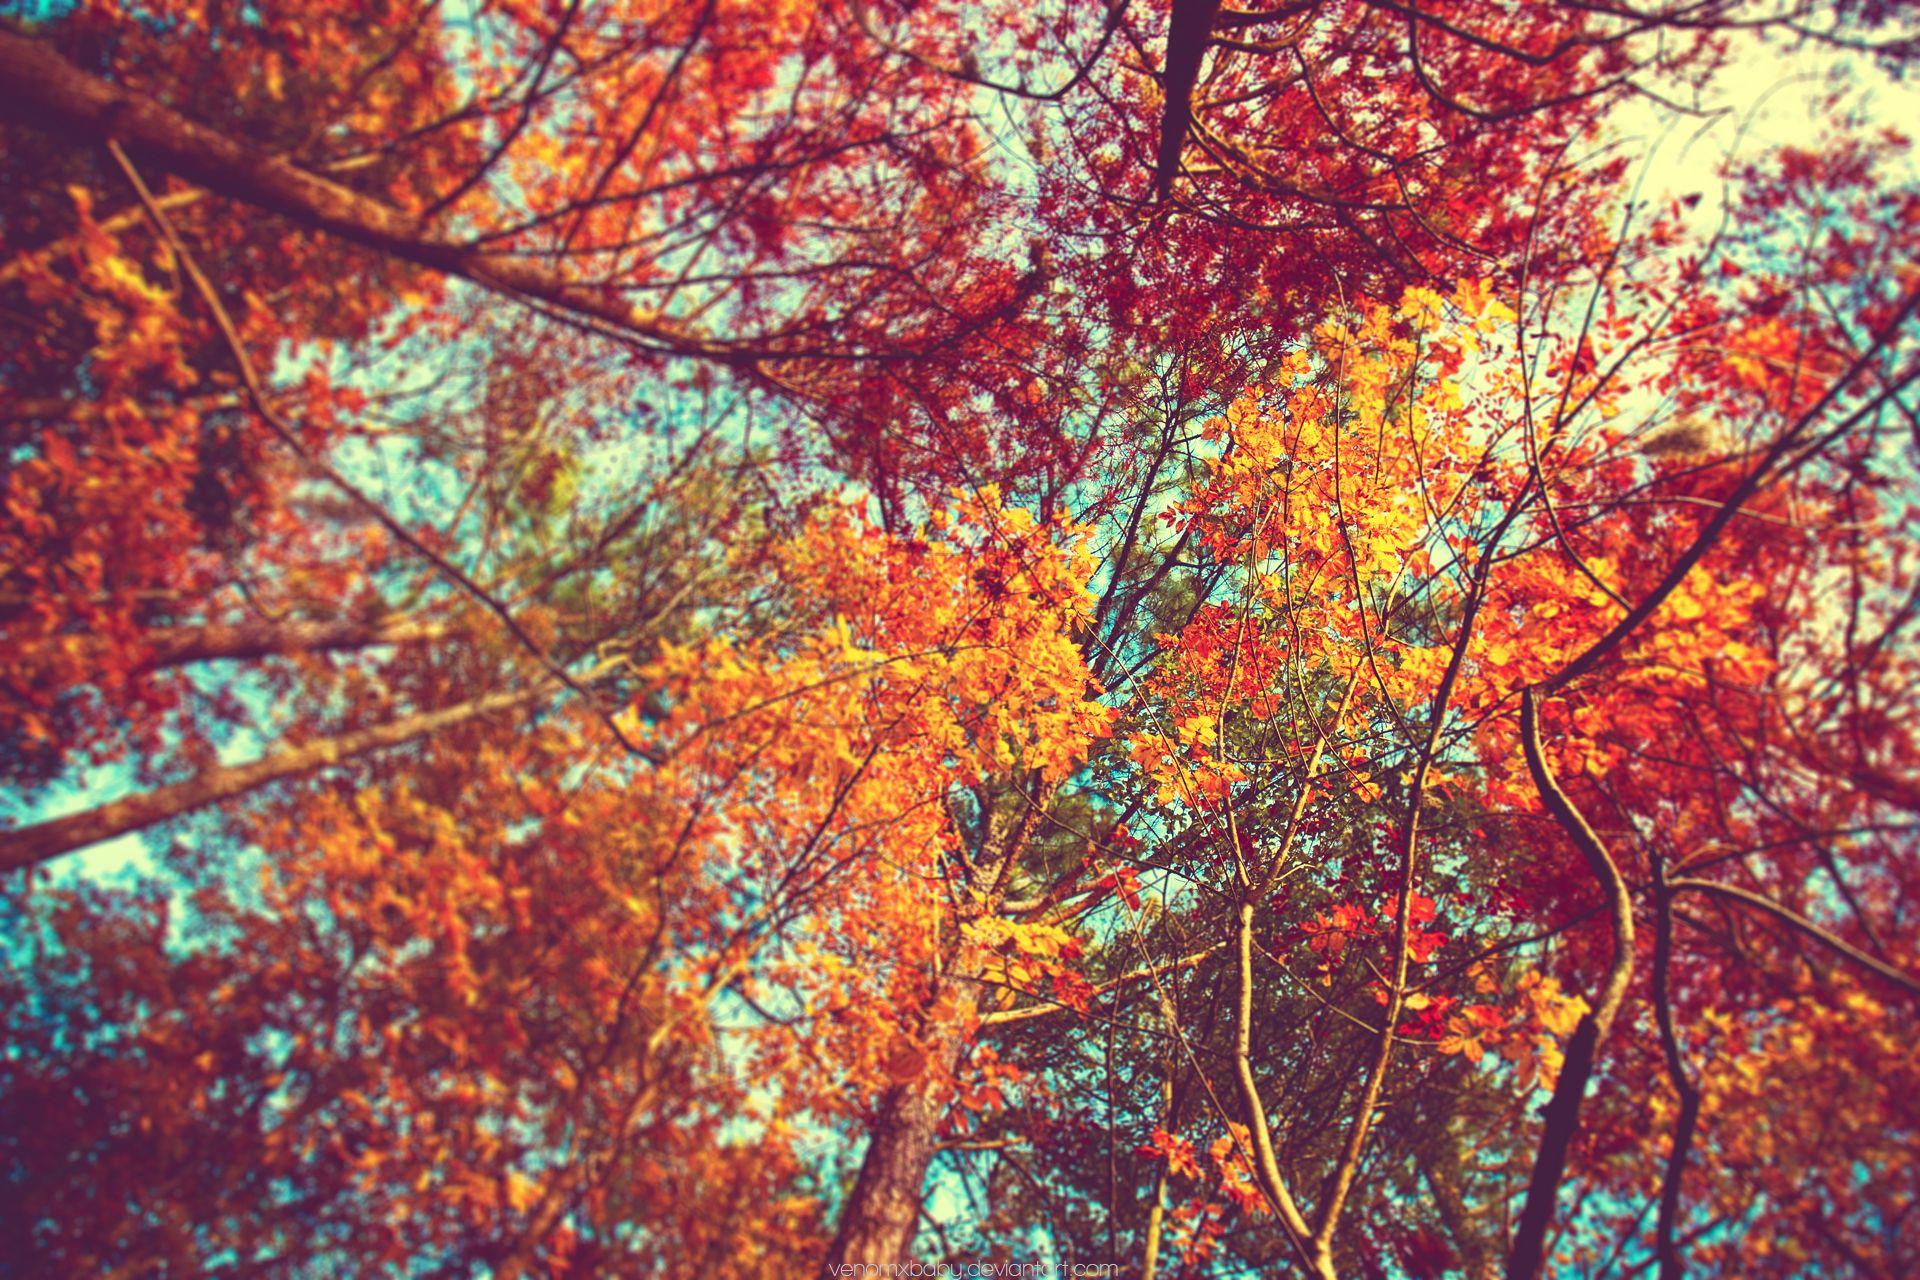 Autumn Tumblr Wallpaper 1080p with High Definition Wallpaper. Desktop wallpaper fall, Autumn tumblr, Fall wallpaper